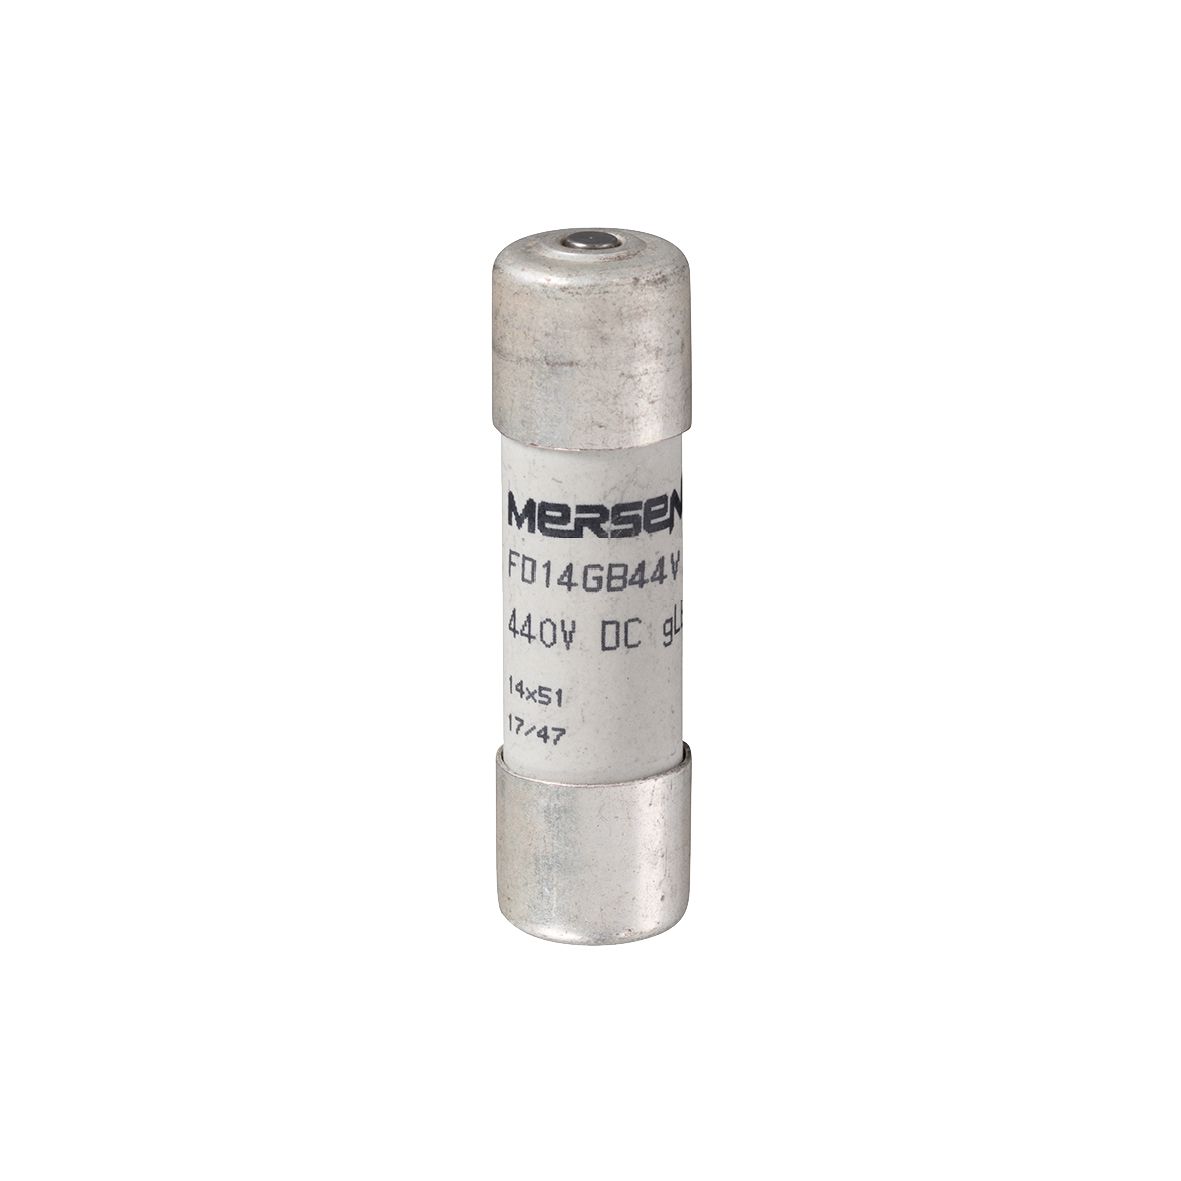 T098687 - Cylindrical fuse-link GRB 440VDC 14x51, 40A with striker